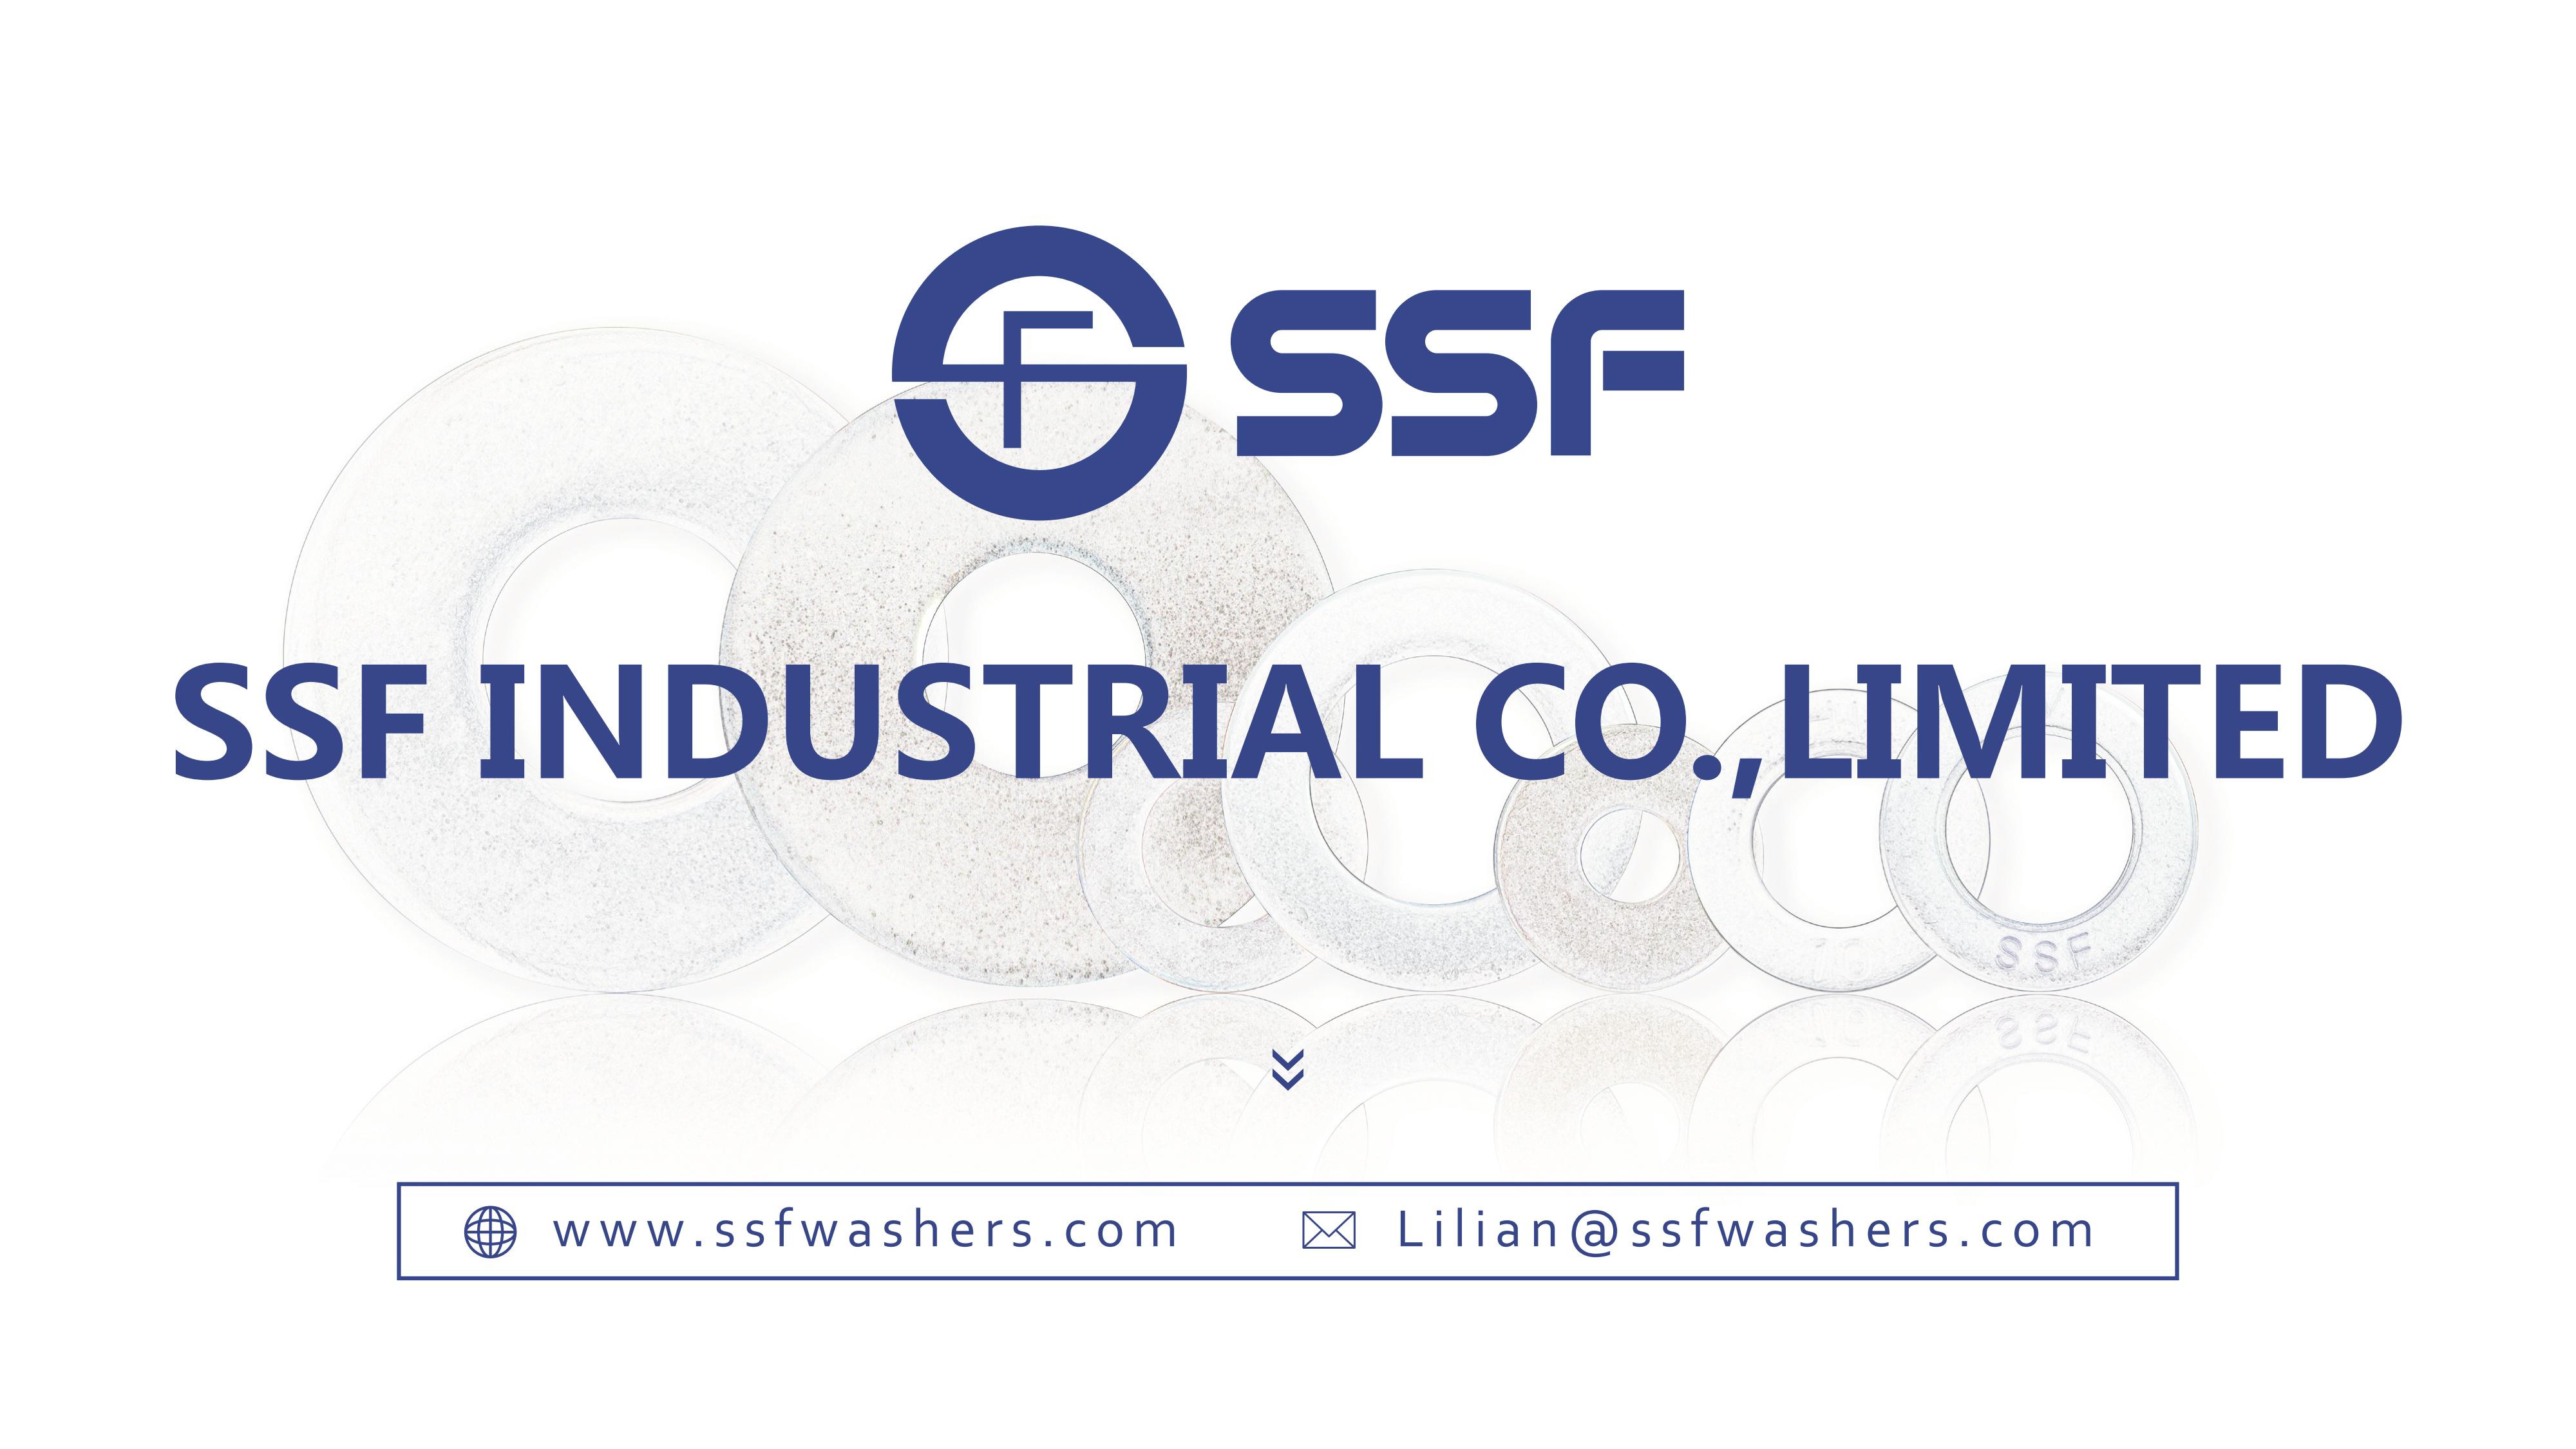 SSF INDUSTRIAL CO., LIMITED Online Catalogues